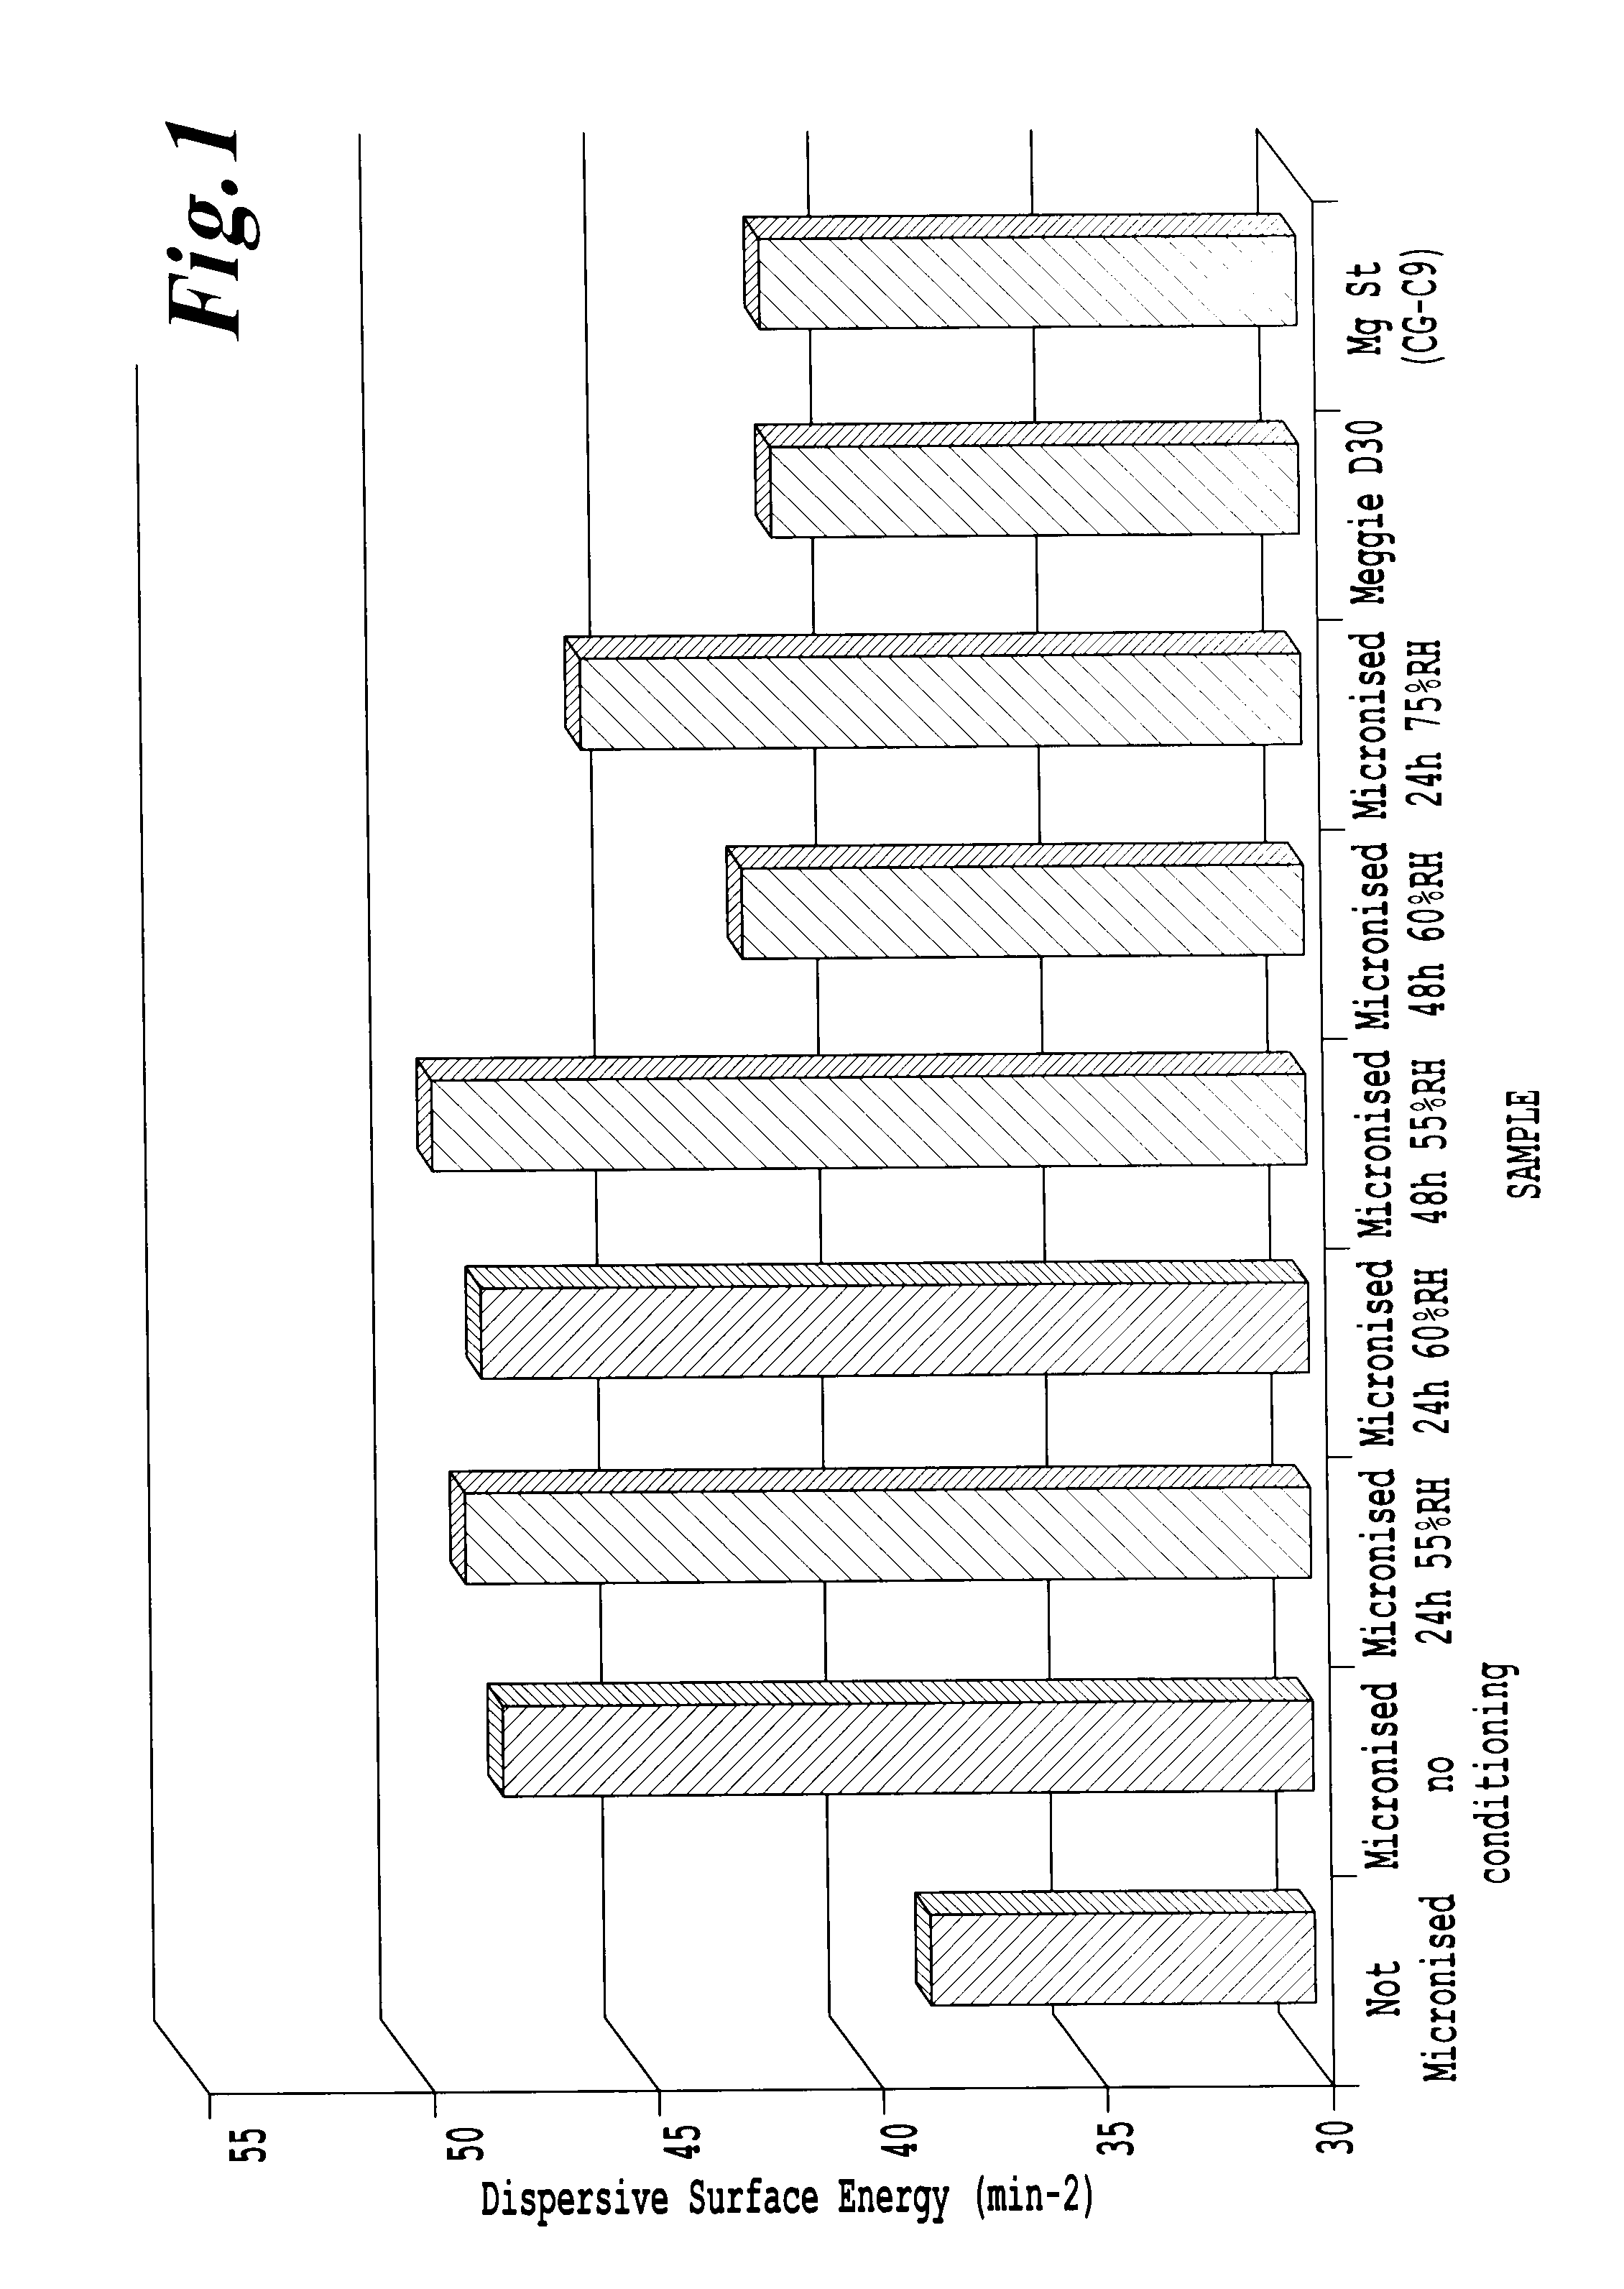 Process for providing particles with reduced electrostatic charges